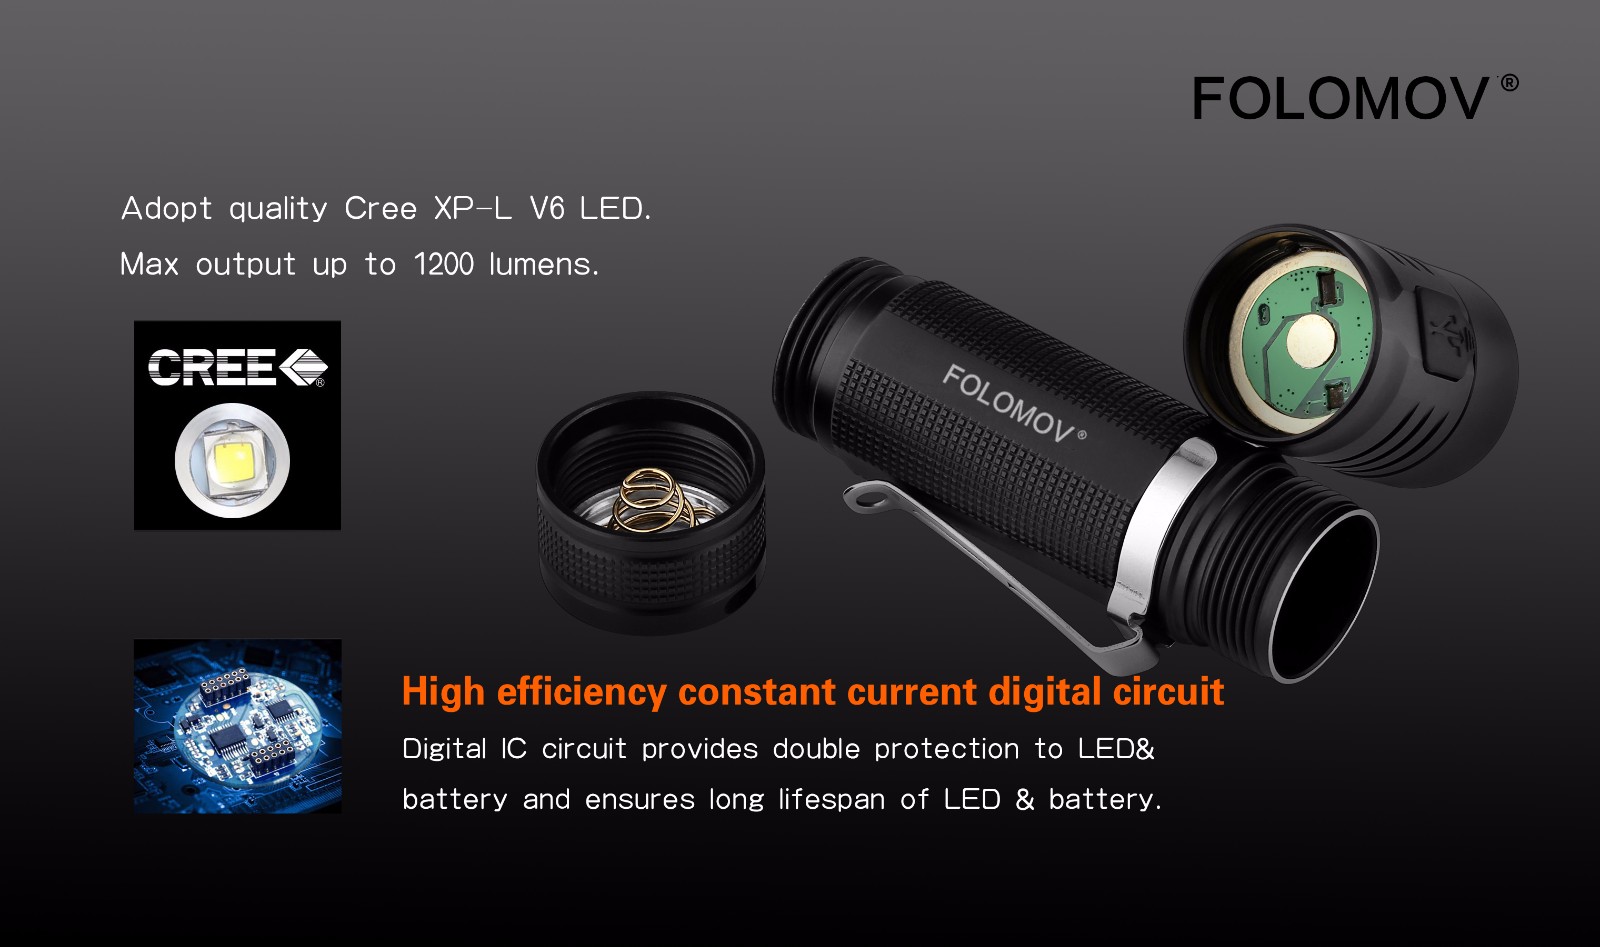 Folomov EDC-C4 1200LM High Lumen Compact EDC Flashlight with 18650 Battery USB Rechargeable Memory Function Mini LED Torch